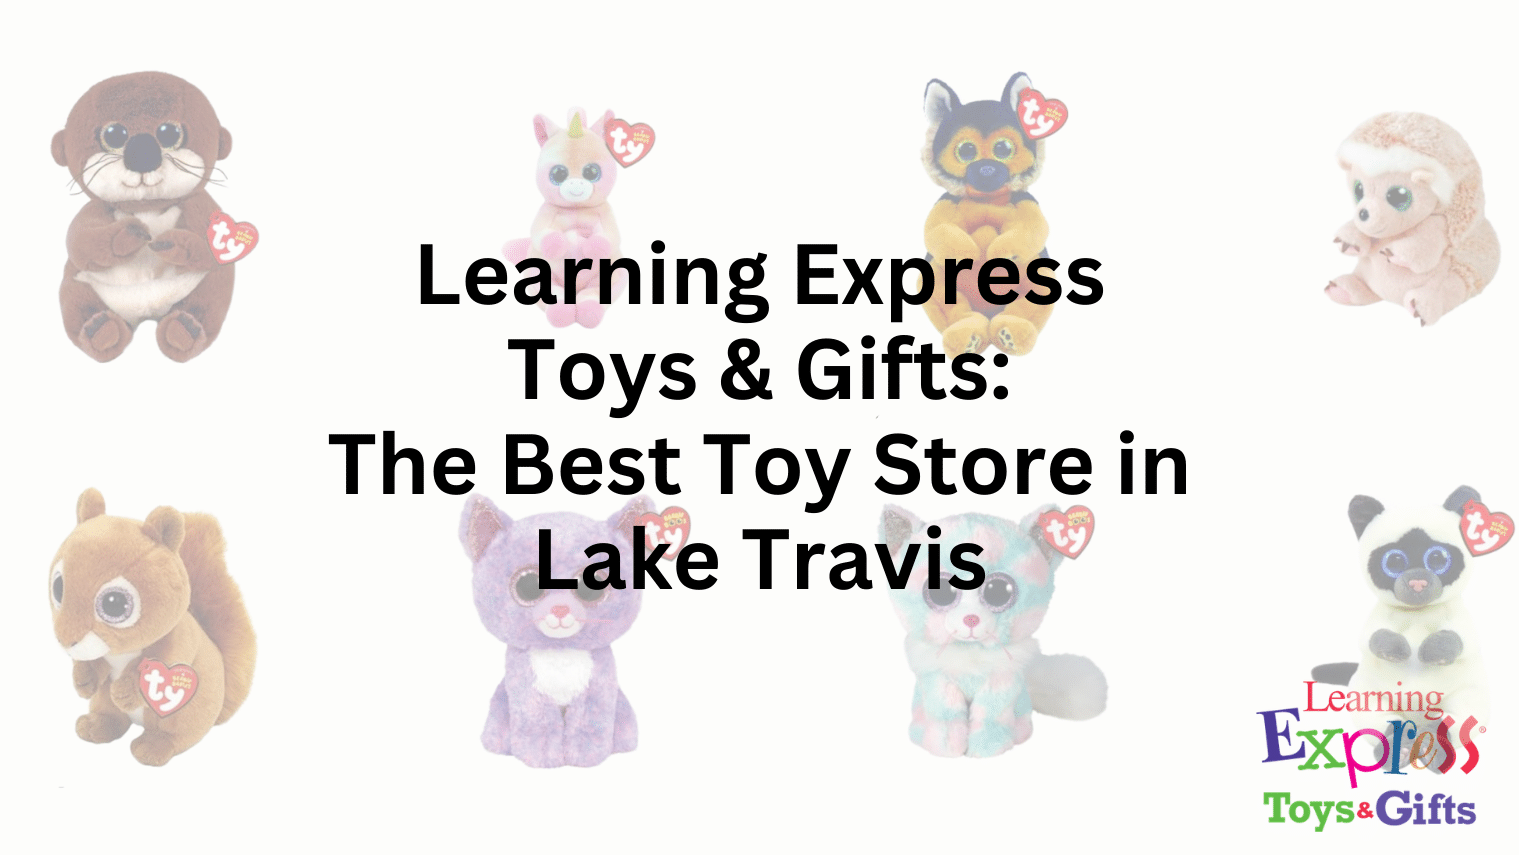 Learning Express Toys & Gifts: The Best Toy Store in Lake Travis